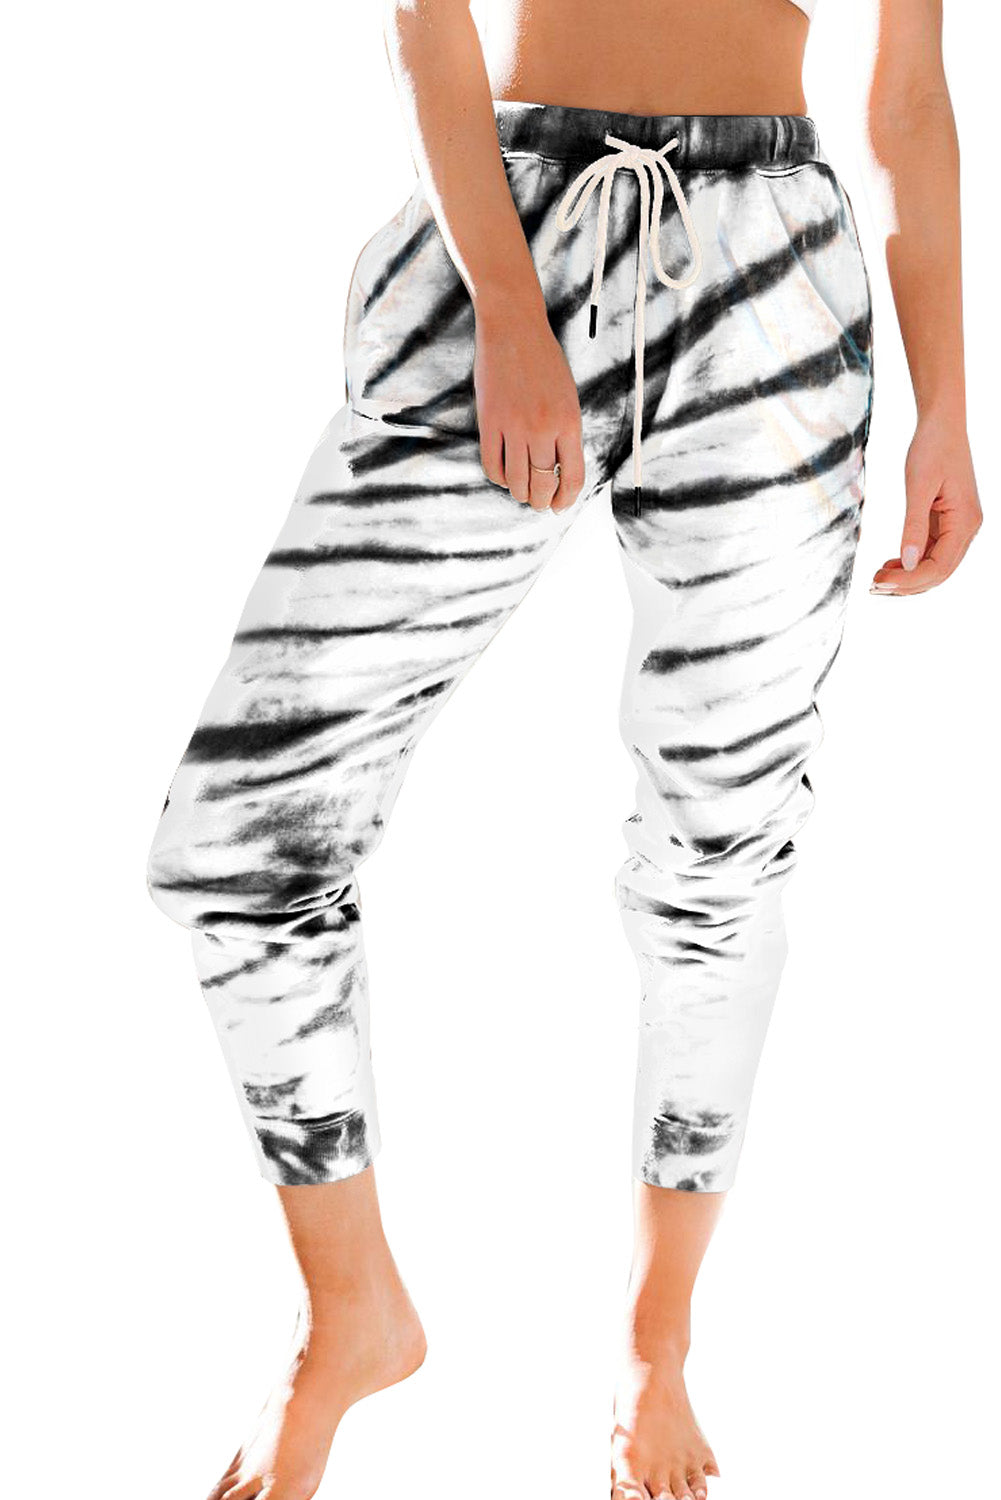 Pocketed Tie-dye Print Joggers